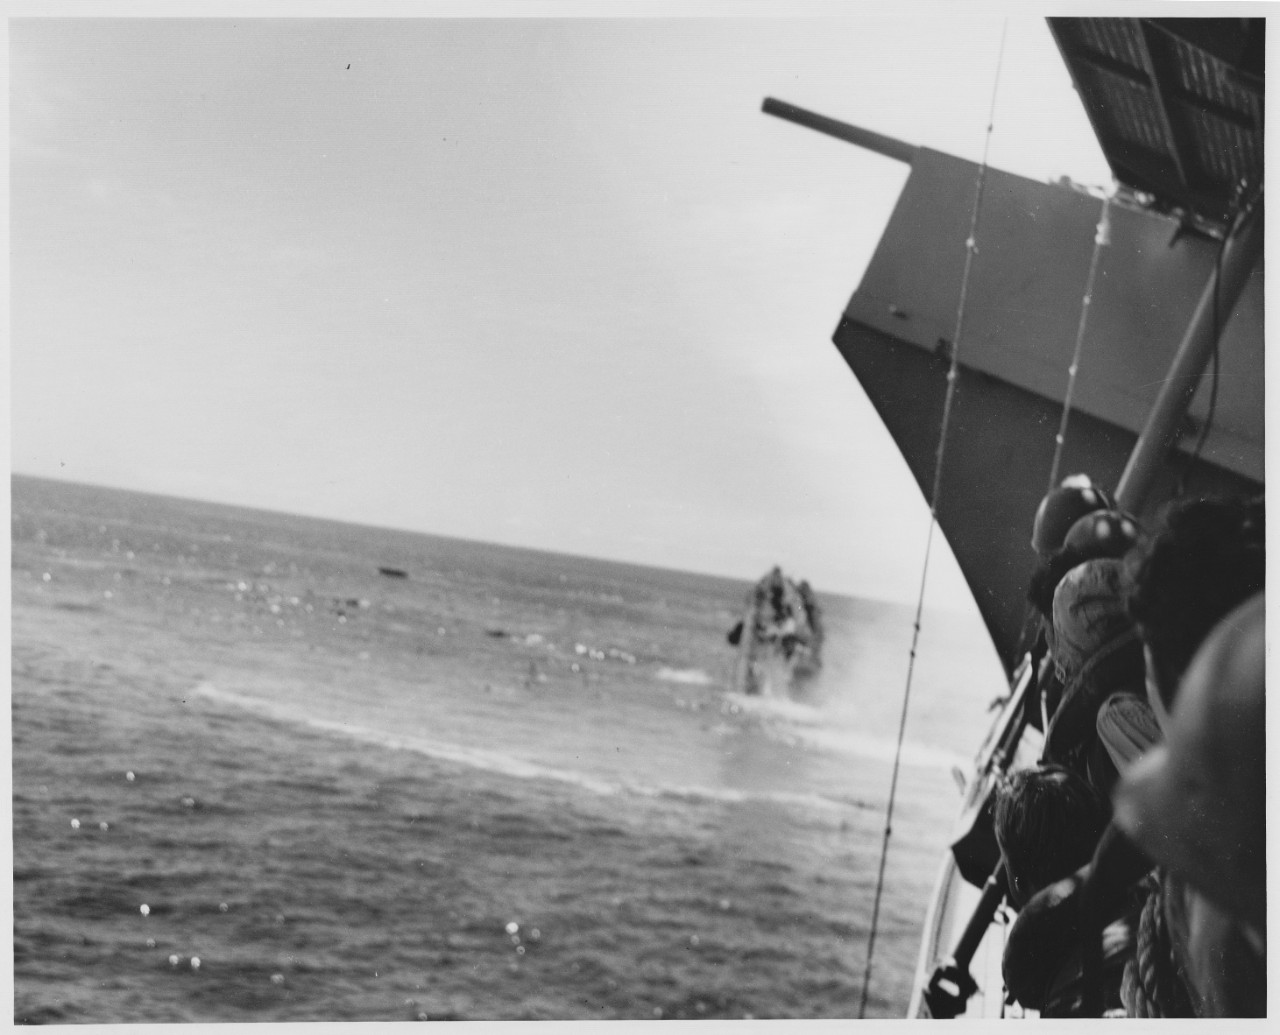 Photo #: 80-G-32320  Battle of Midway, June 1942